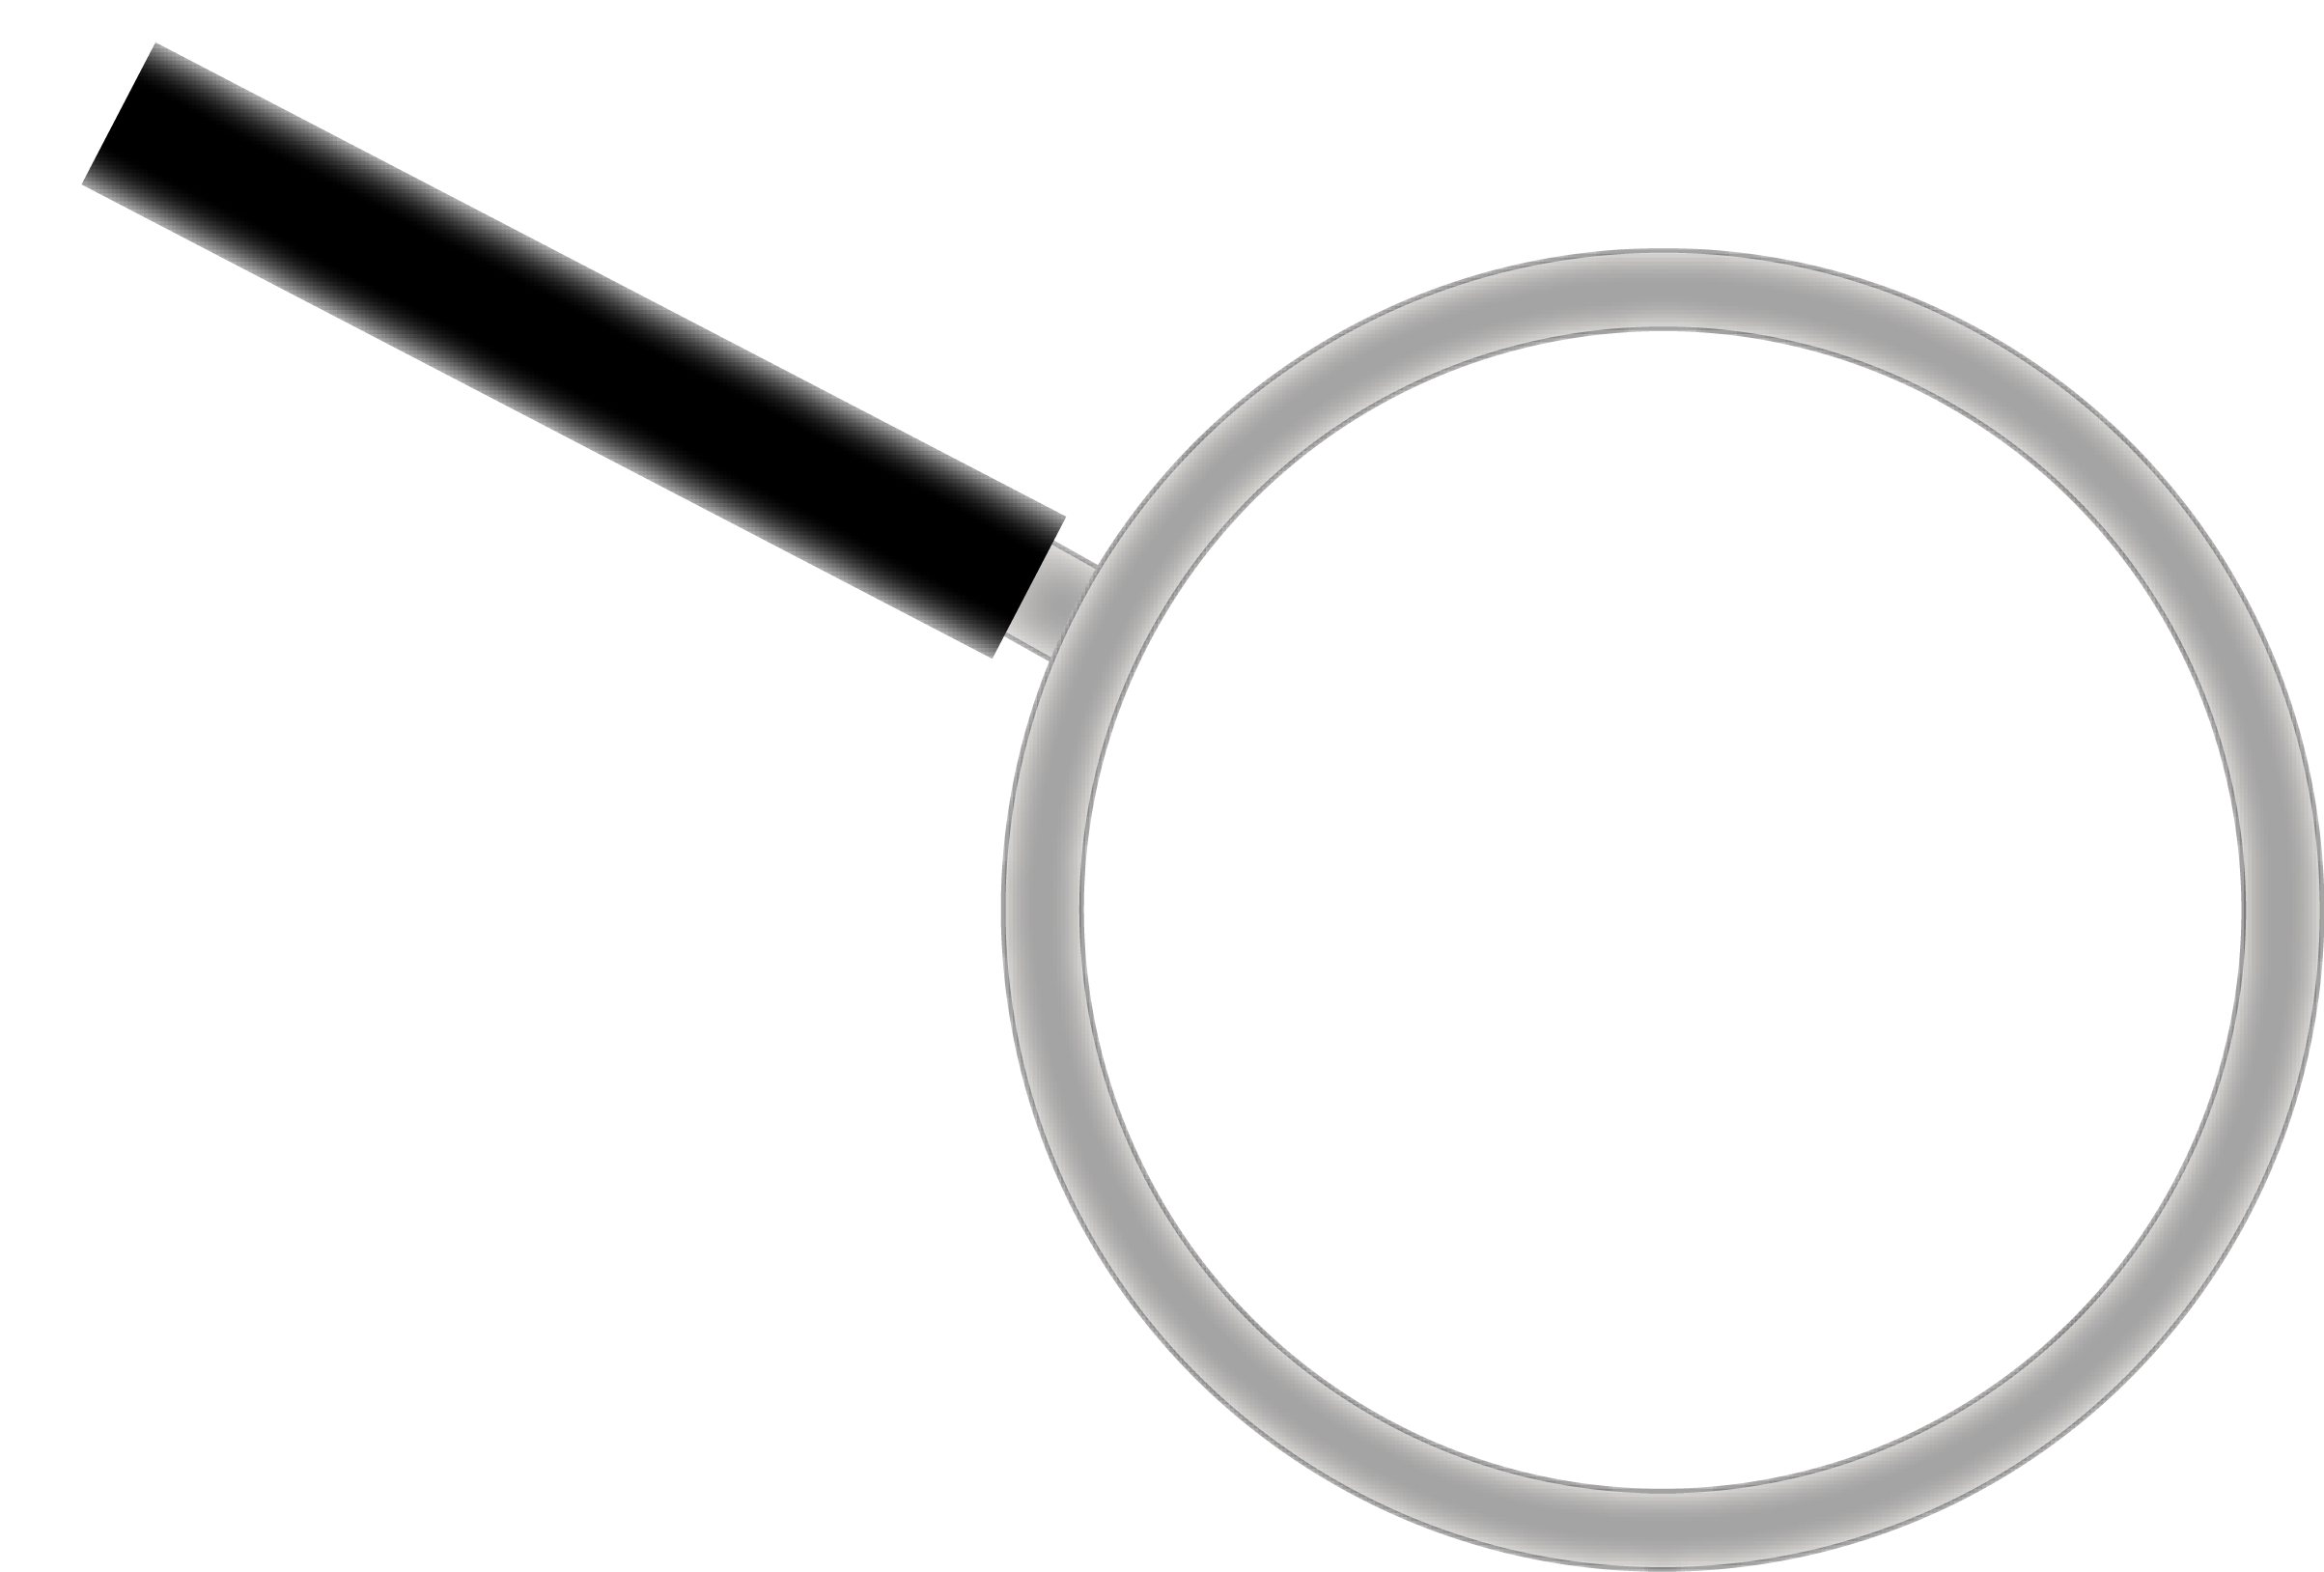 Loupe PNG image transparent image download, size: 2027x2400px